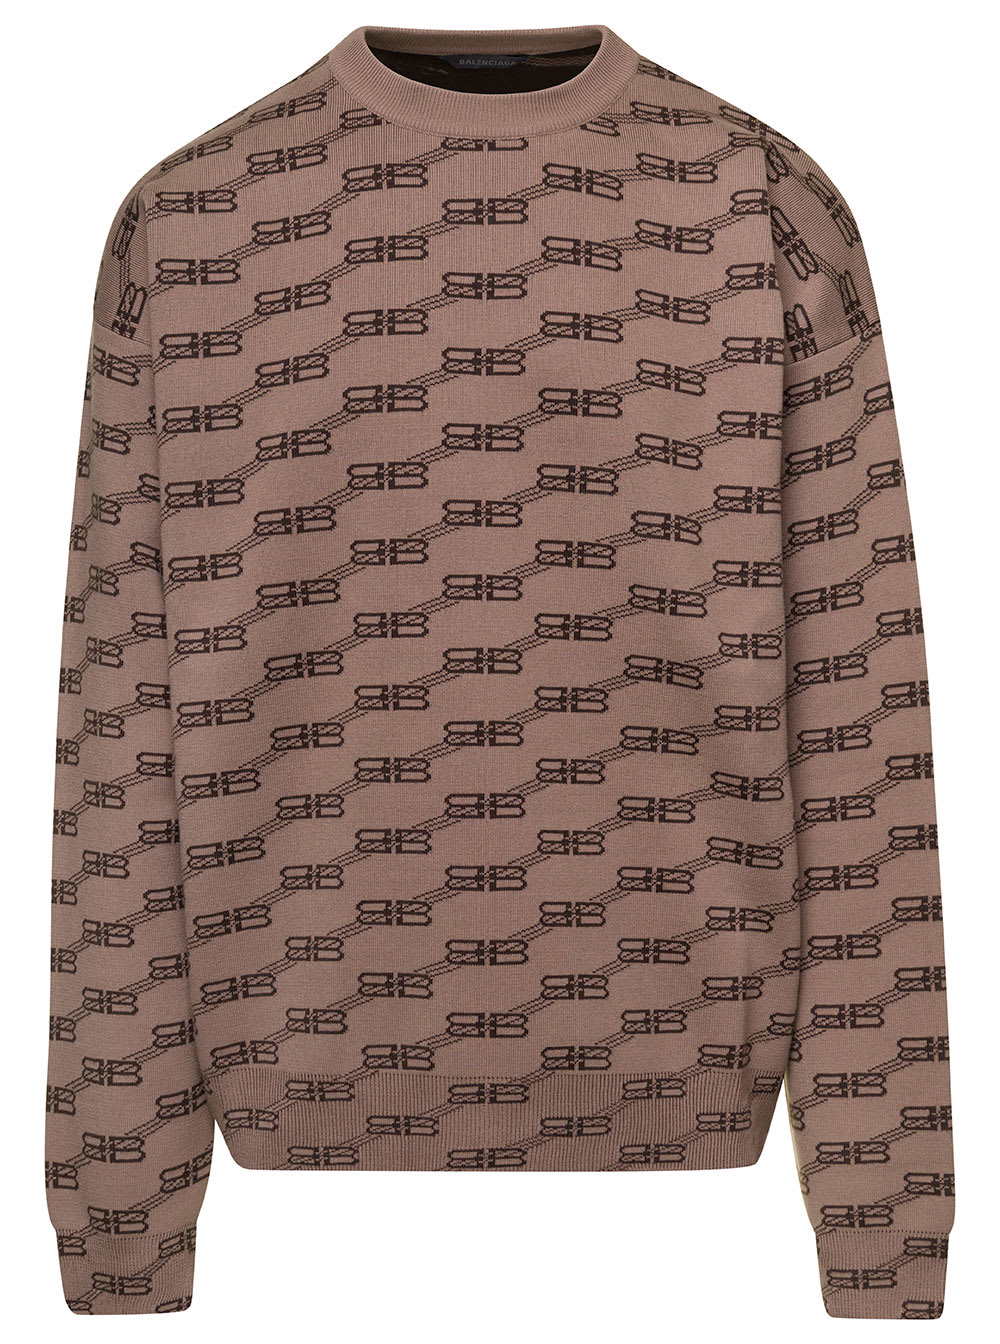 Balenciaga Beige Knit Sweater With All-over Monogram Jacquard In Cotton Blend Man